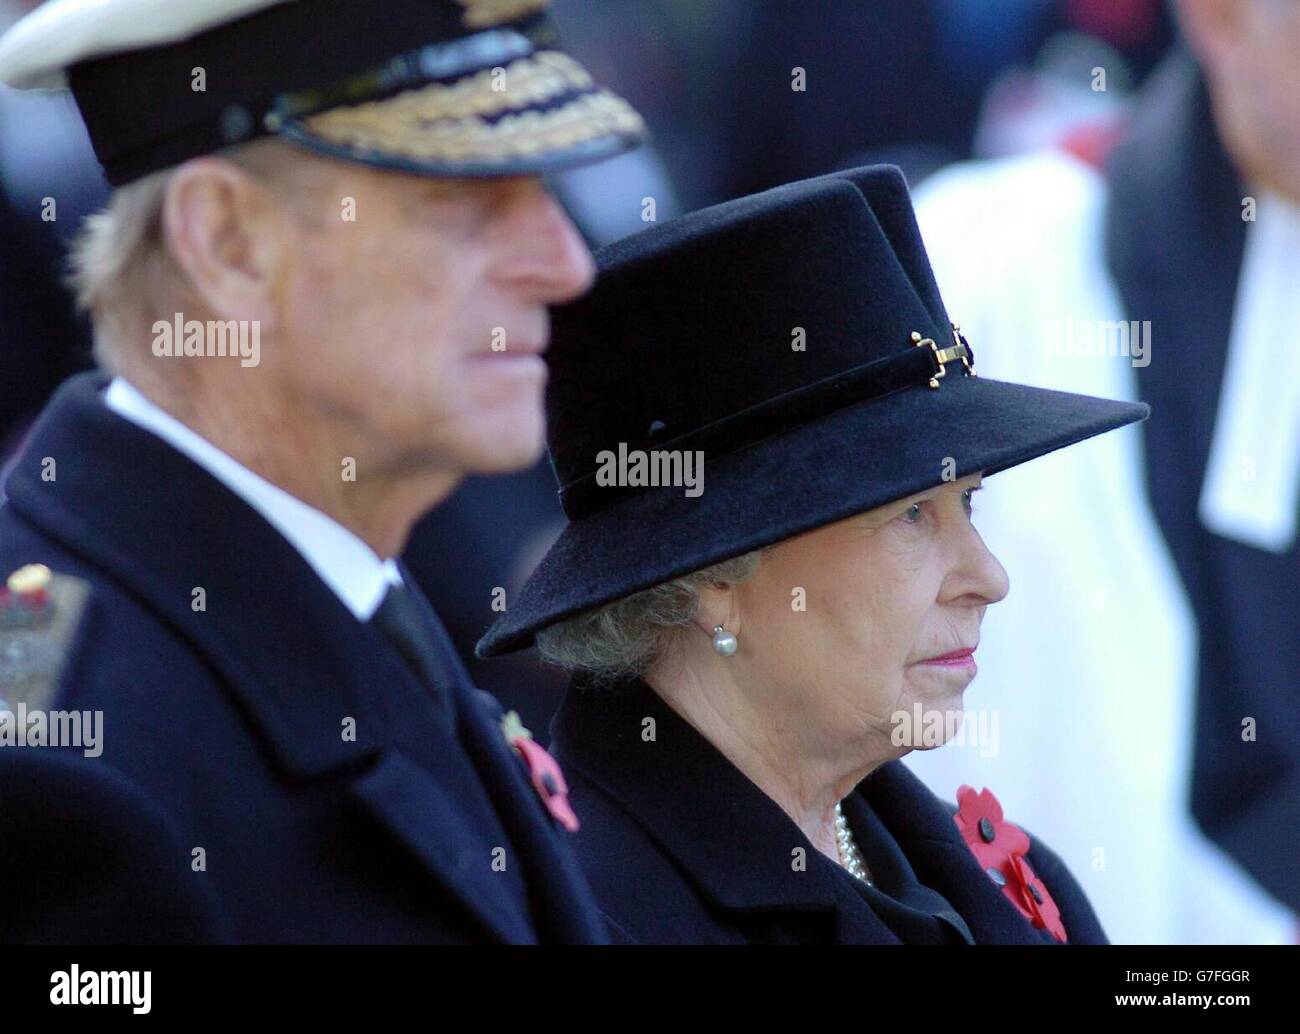 Britain's Queen Elizabeth II with the Duke of Edinburgh observing a minute's silence after planting a wooden Remembrance Cross bearing a scarlet poppy during a service to mark Armistice Day at the Field of Remembrance in the grounds of London's Westminster Abbey. Hundreds of small wooden crosses, planted in the grounds of the Abbey and adorned with a blood-red poppy, bear the name of a fallen loved one and message of commemoration. 13/11/04: The brave men and women who have given their lives in protecting Britain will be honoured in the annual Festival of Remembrance. The Queen and Duke of Stock Photo